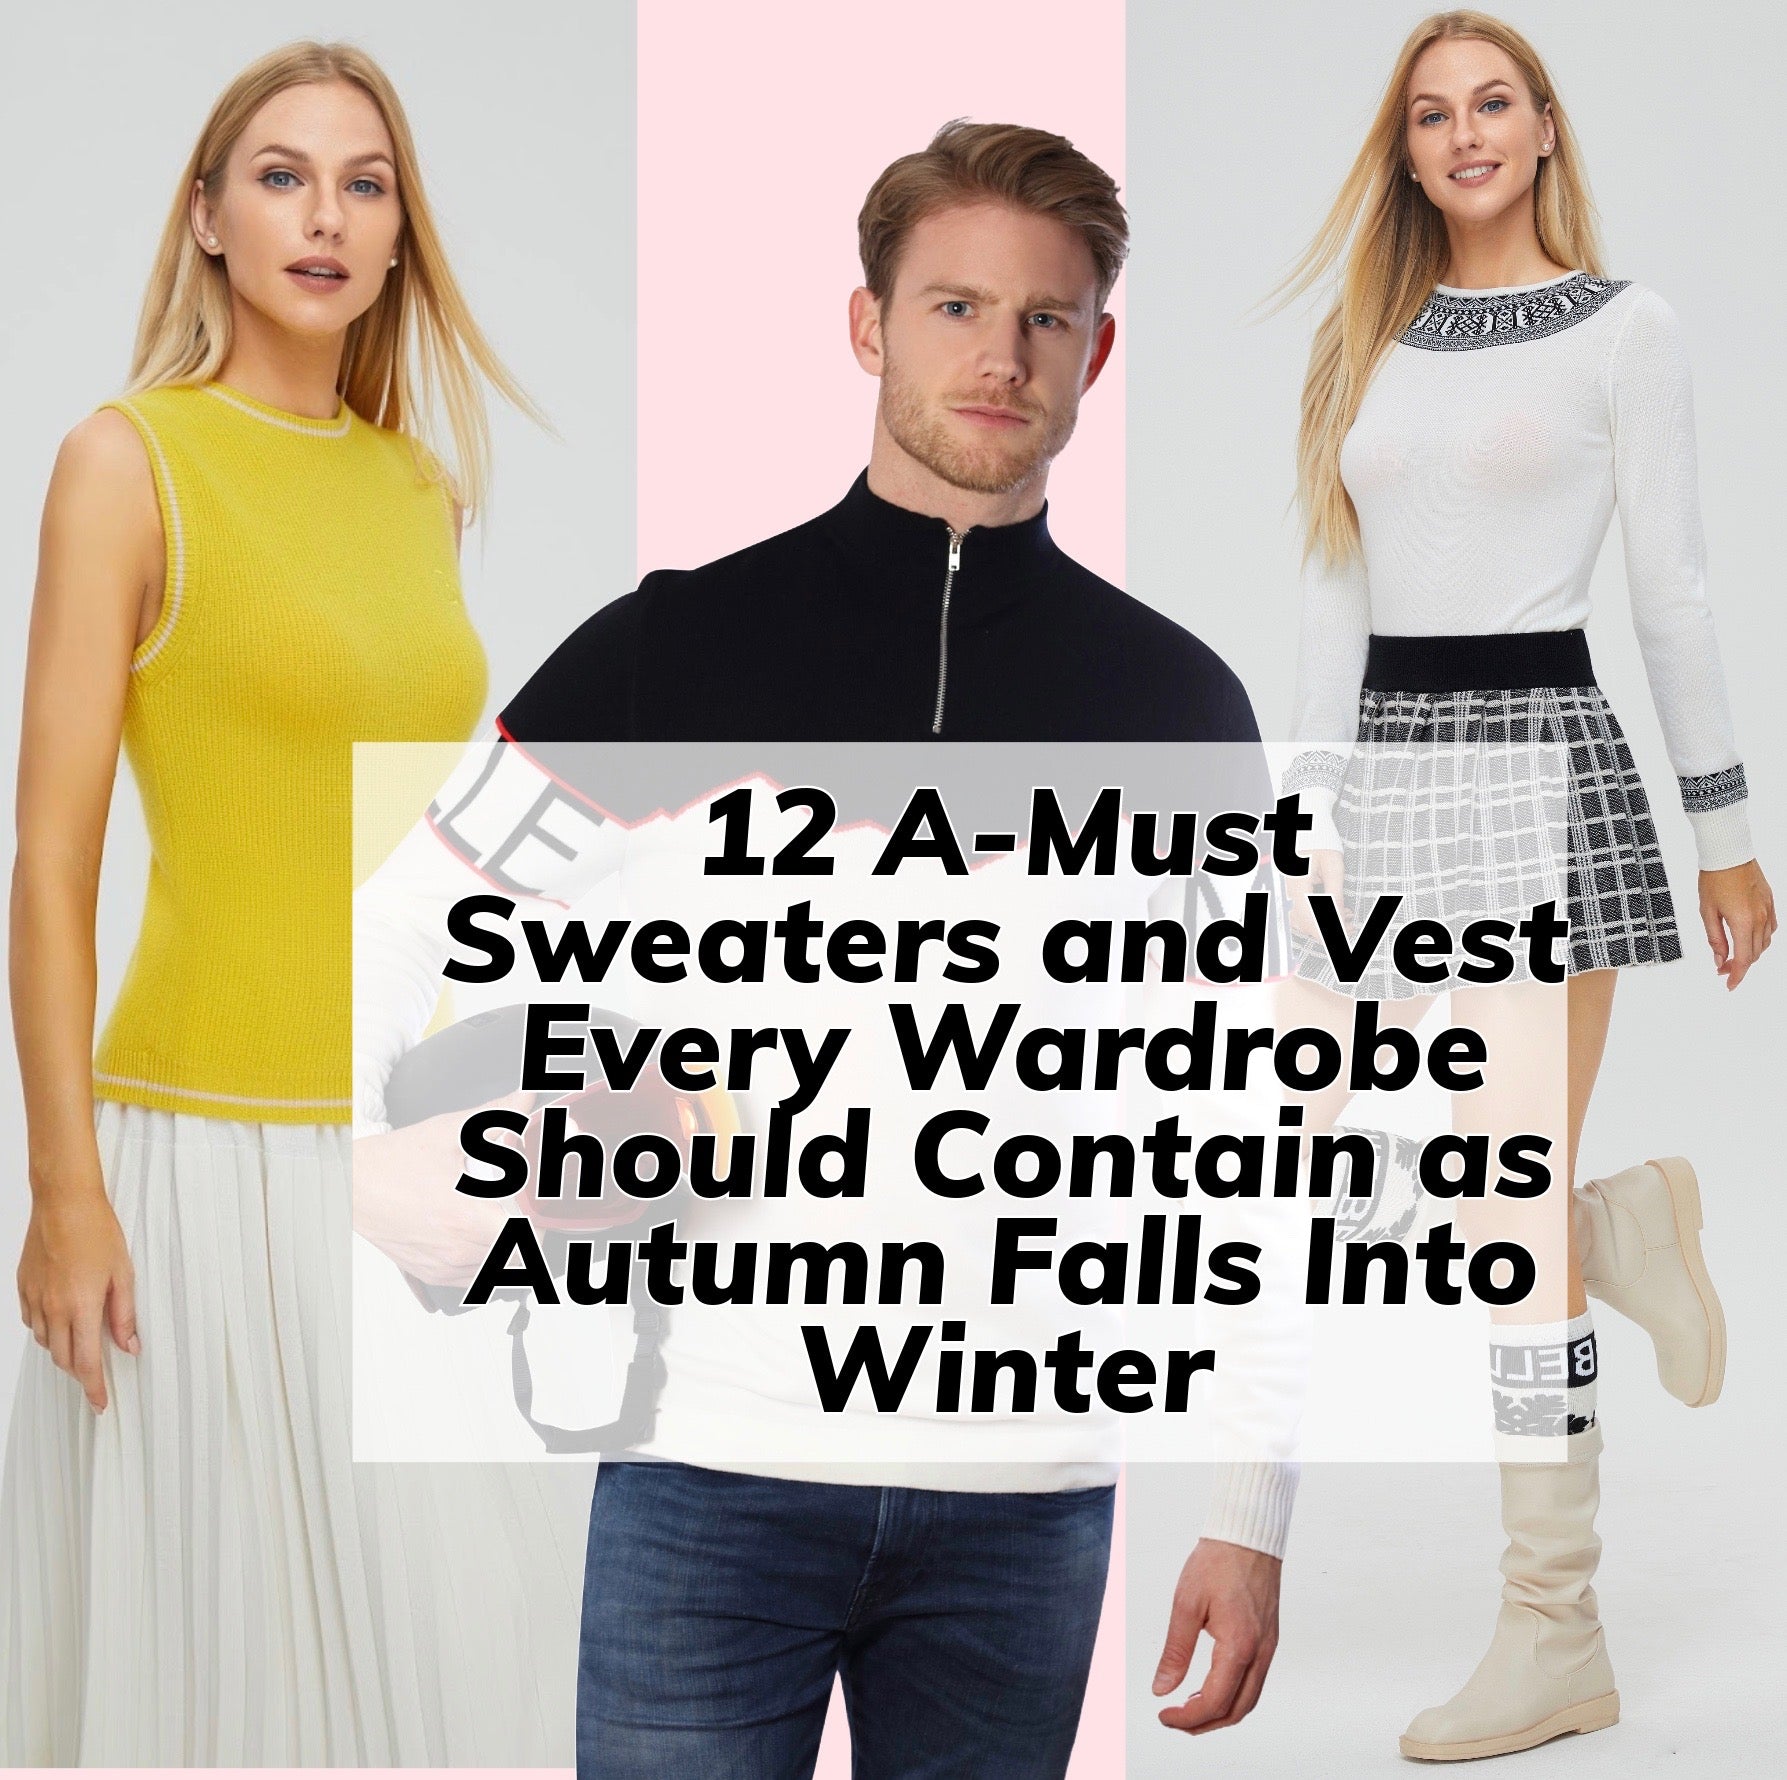 12 A-Must Sweaters and Vest Every Wardrobe Should Contain as Autumn Falls Into Winter